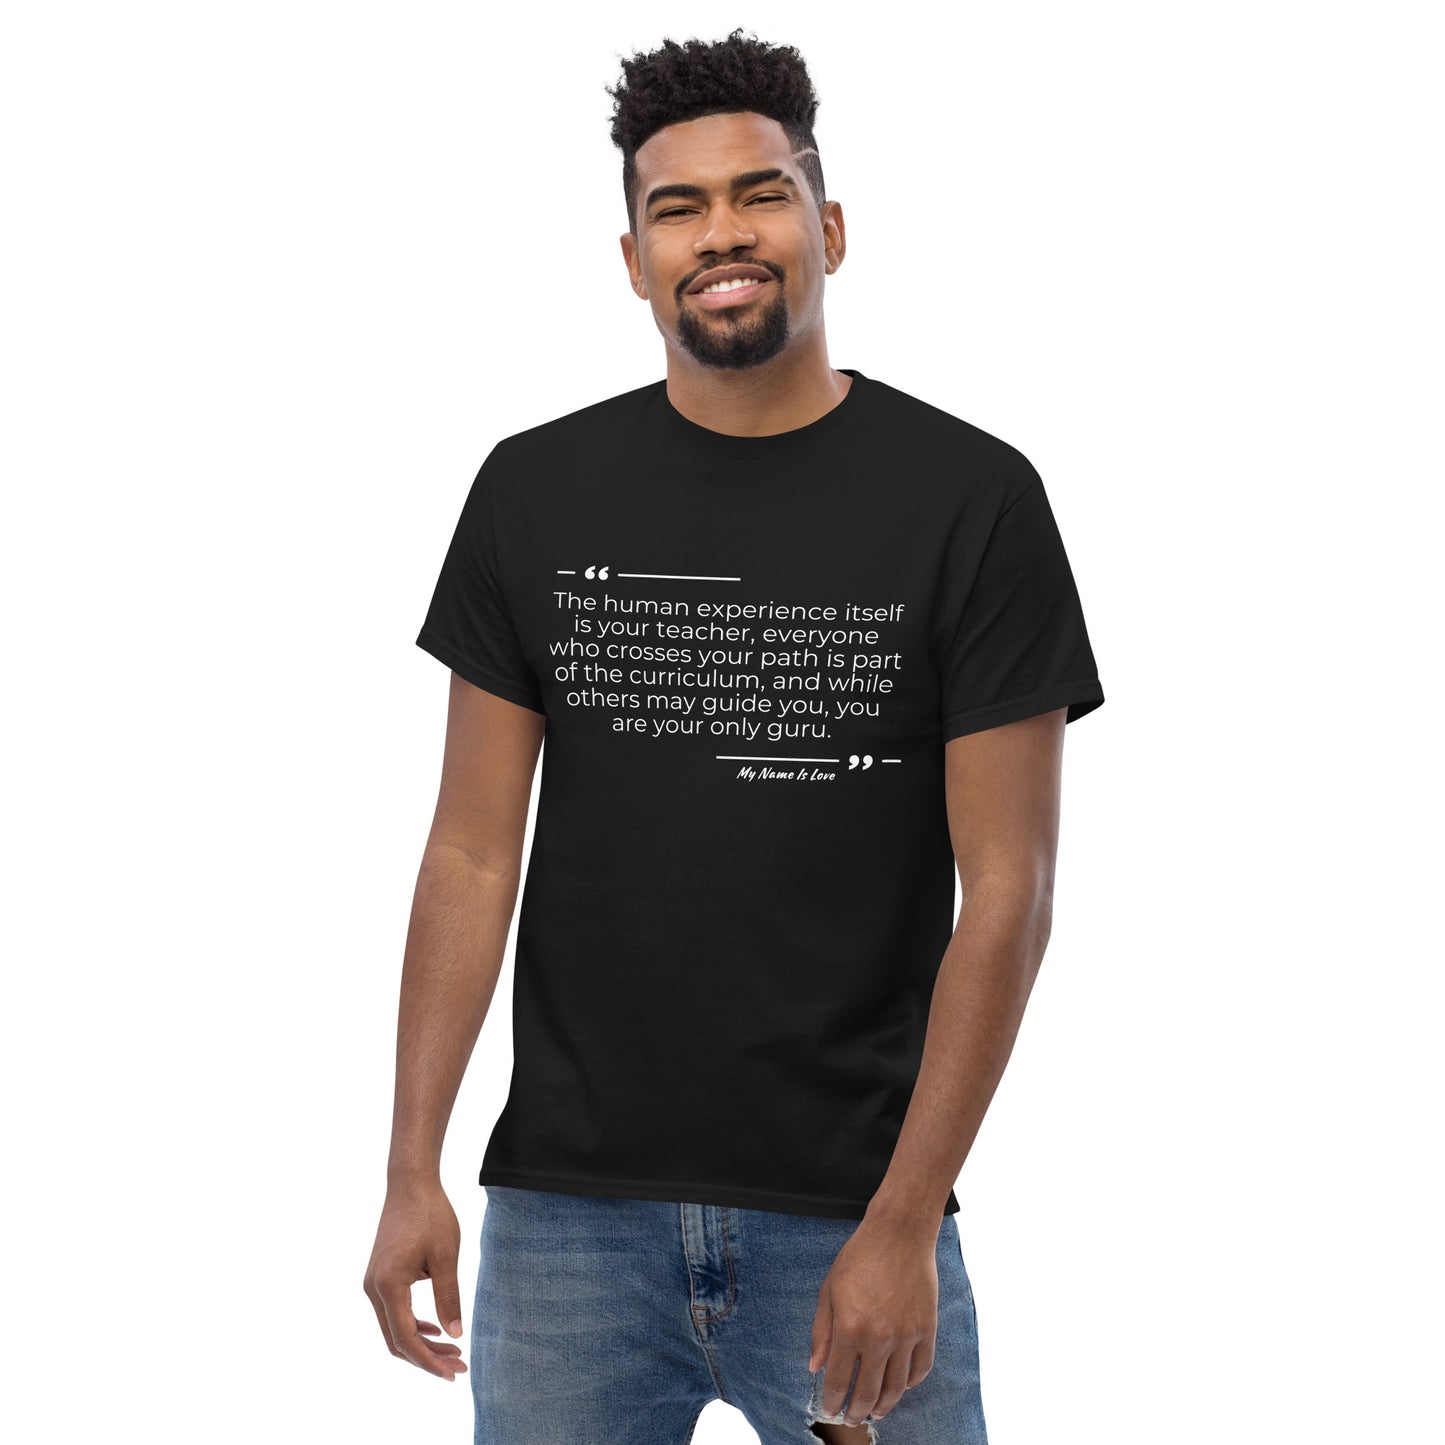 Human Experience Quote: Men's classic tee